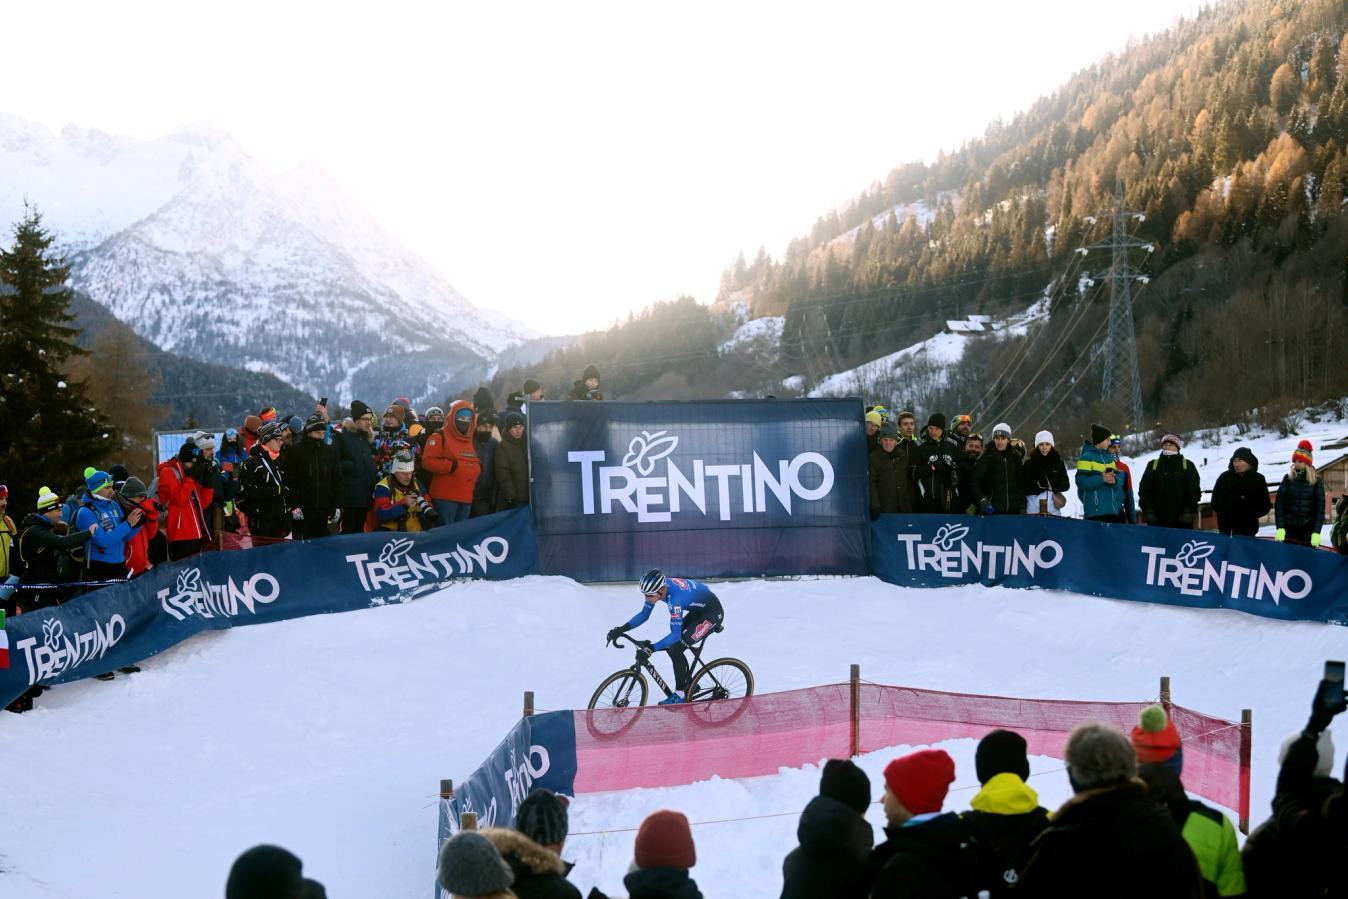 Trentino offers one of the most spectacular courses of the season, and Niels Vandeputte will be hoping to take full advantage once again